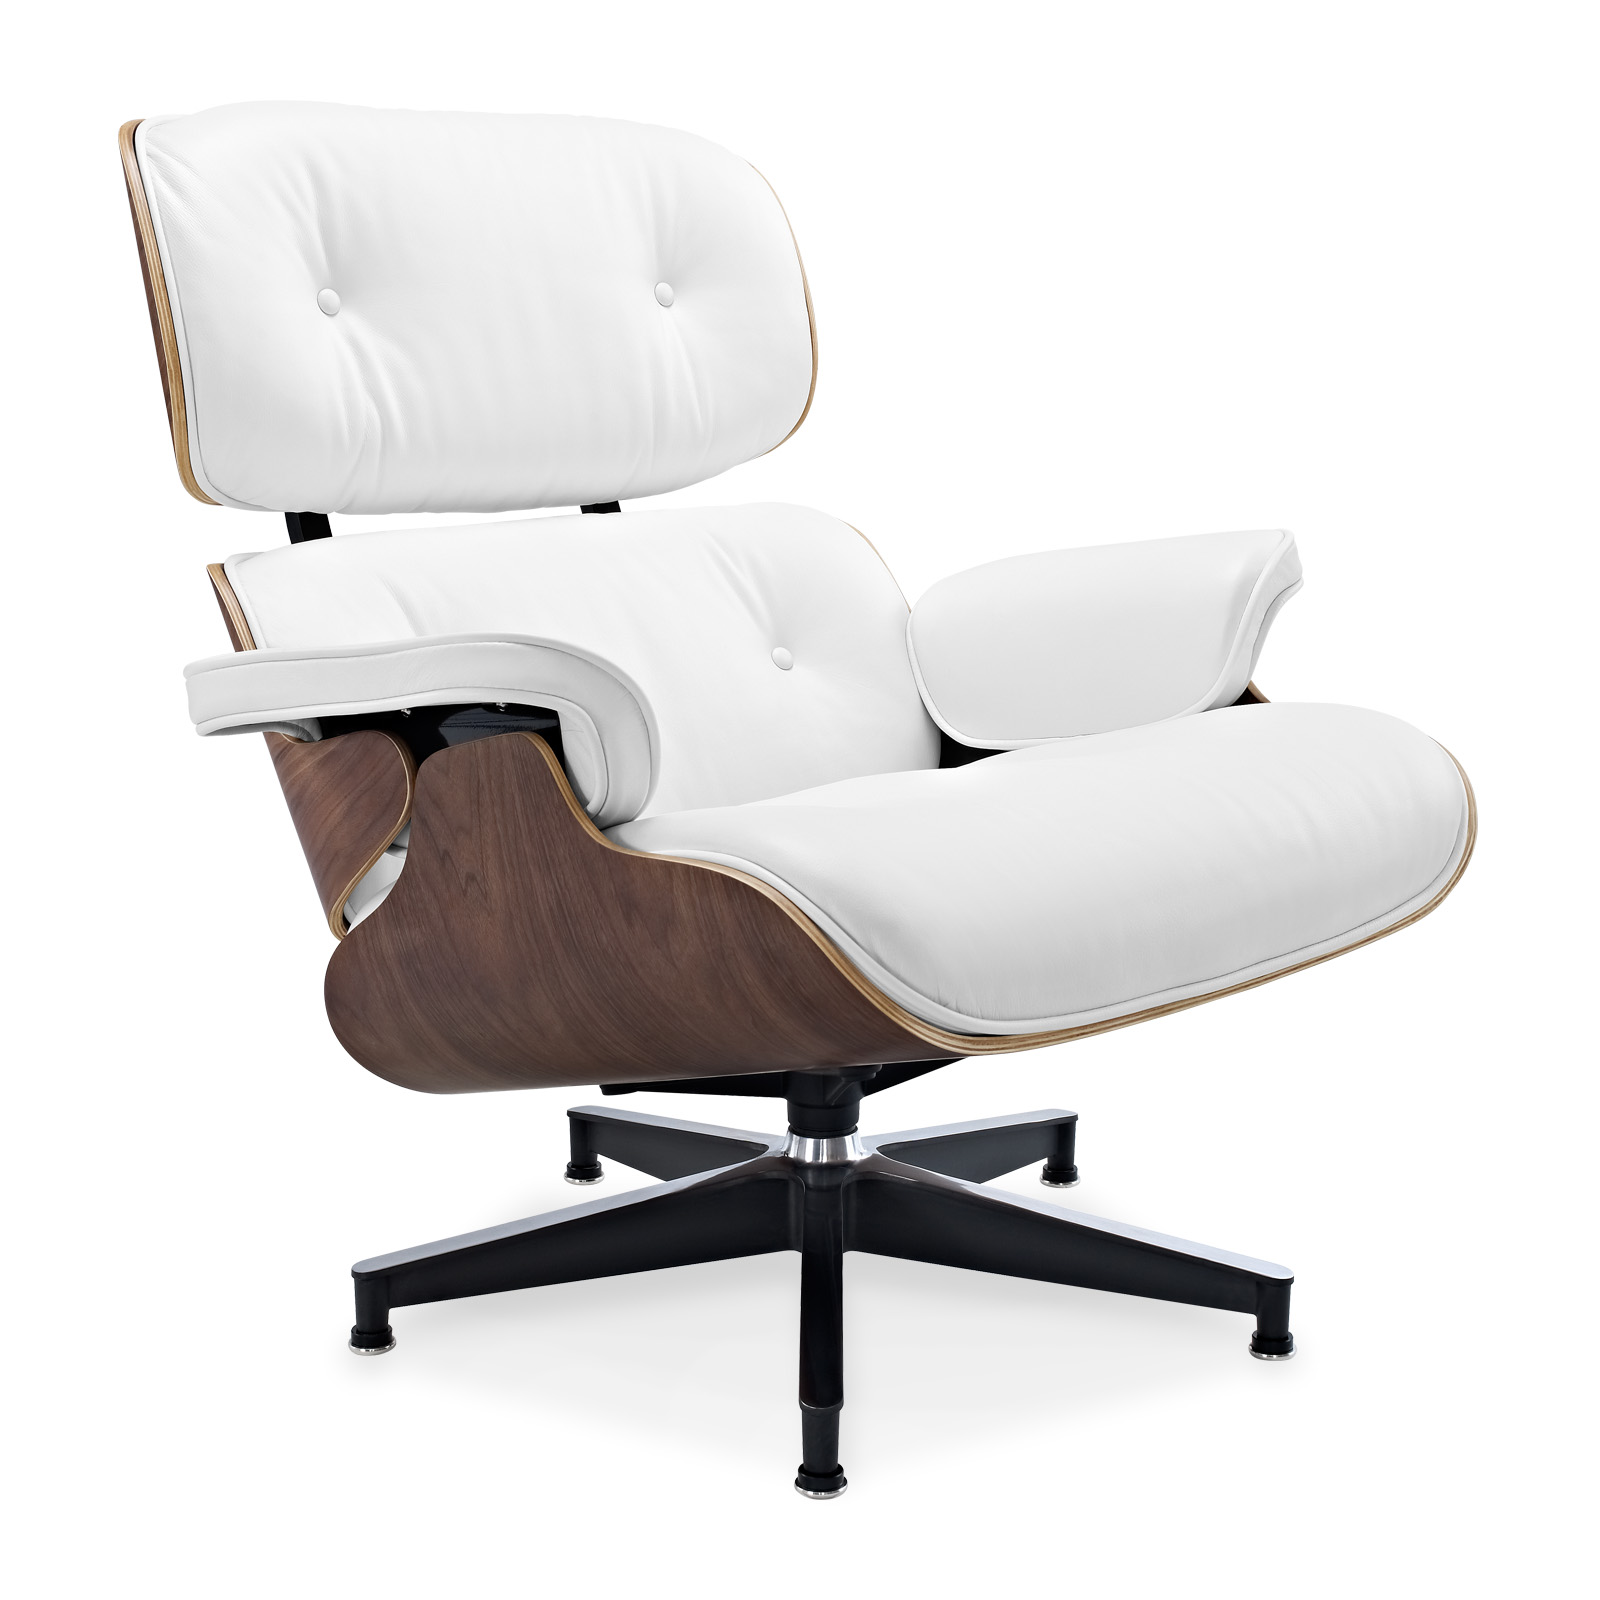 eames-lounge-chair-analin-leather-white-3-CHA380206V3-1.png